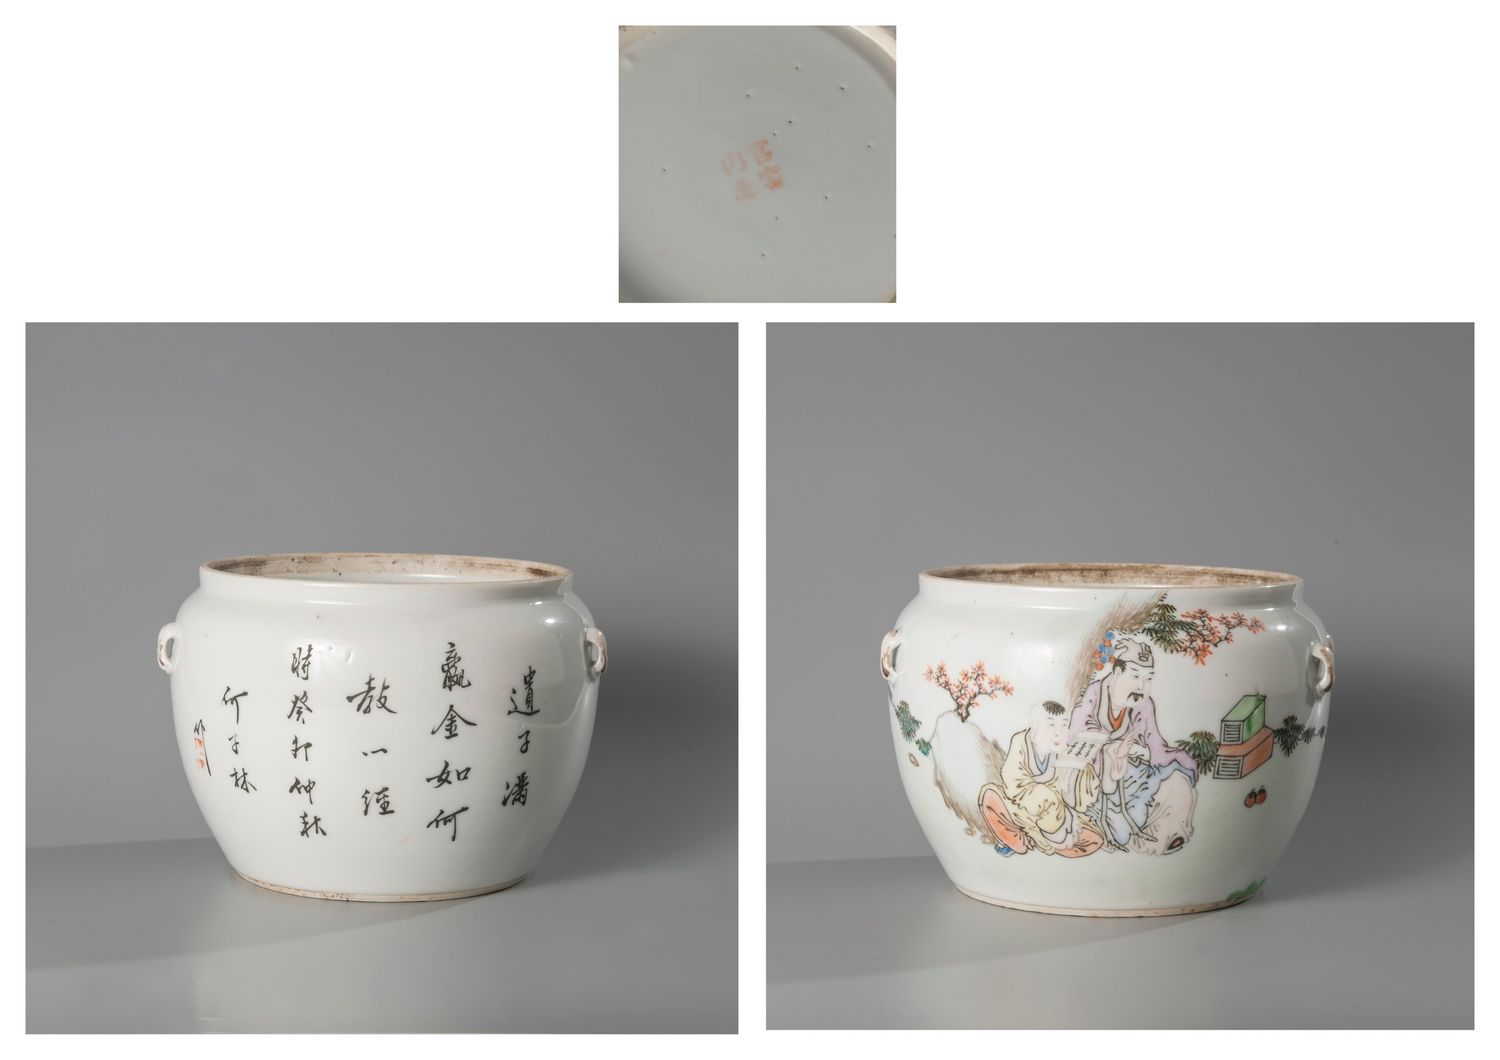 Null Porcelain bowl with calligraphy and literary decoration